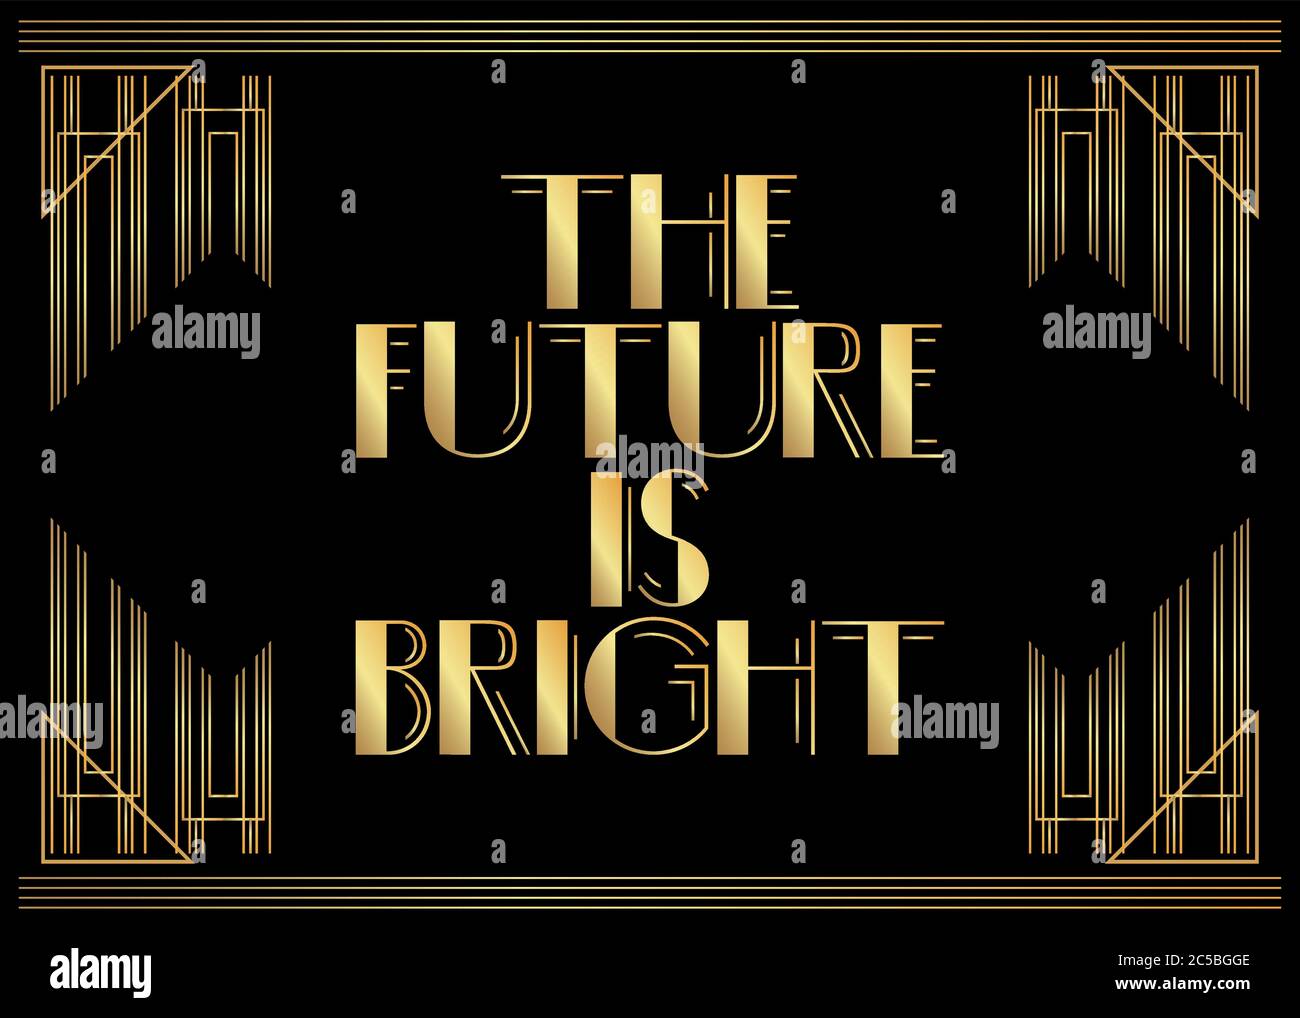 Art Deco The Future is bright text. Decorative greeting card, sign with vintage letters. Stock Vector